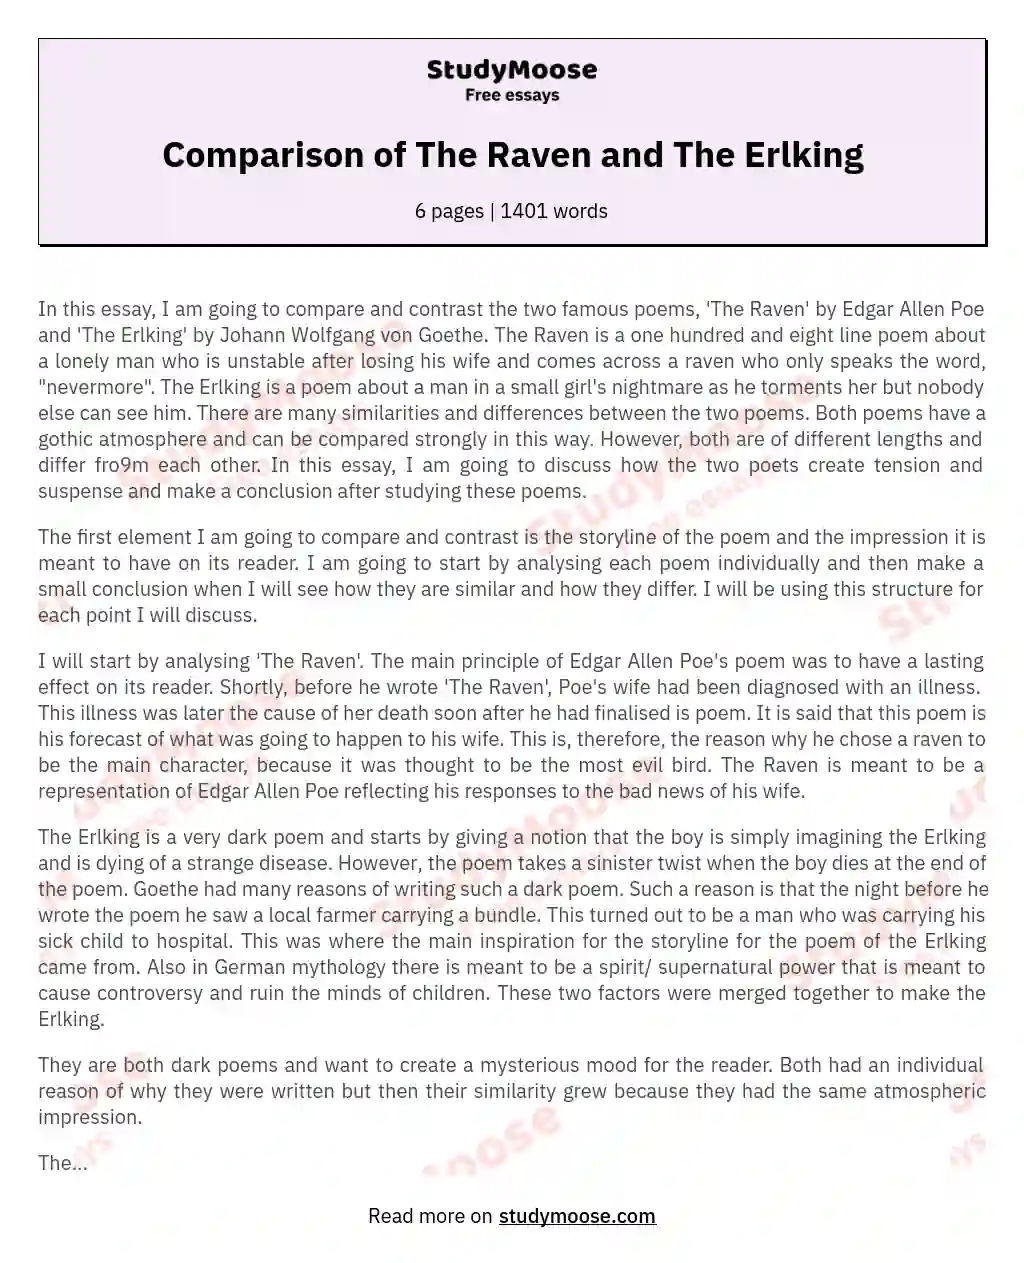 Comparison of The Raven and The Erlking essay